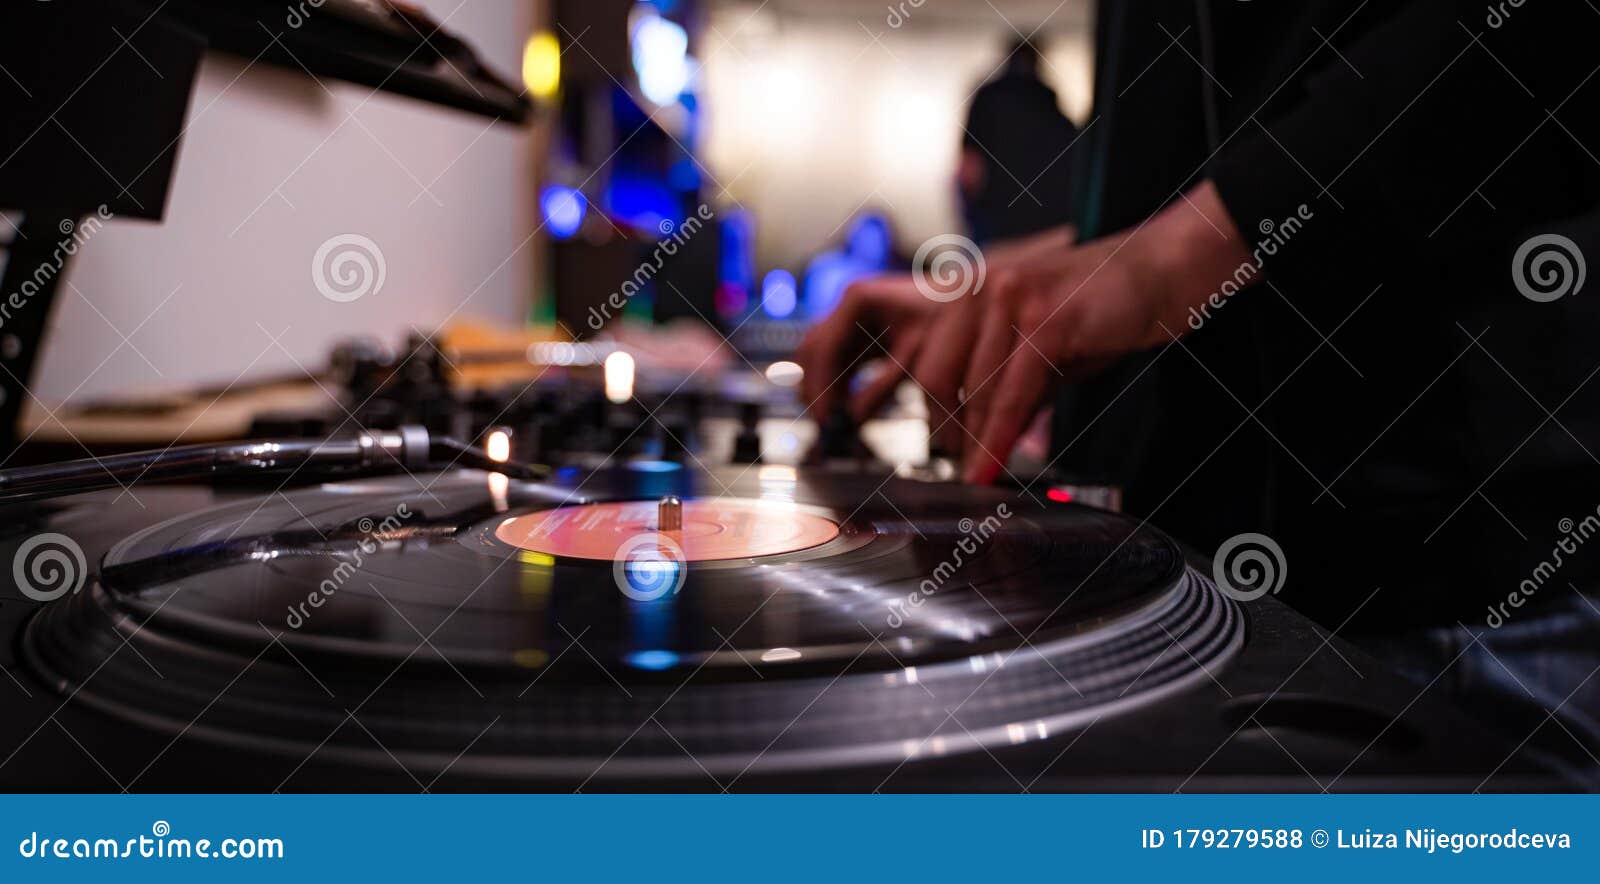 Party Dj Plays Music at Hip Hop Concert on Turntables Vinyl Record Player &  Sound Mixer. Scratching Vinyls Records Stock Photo - Image of  entertainment, concert: 179279588